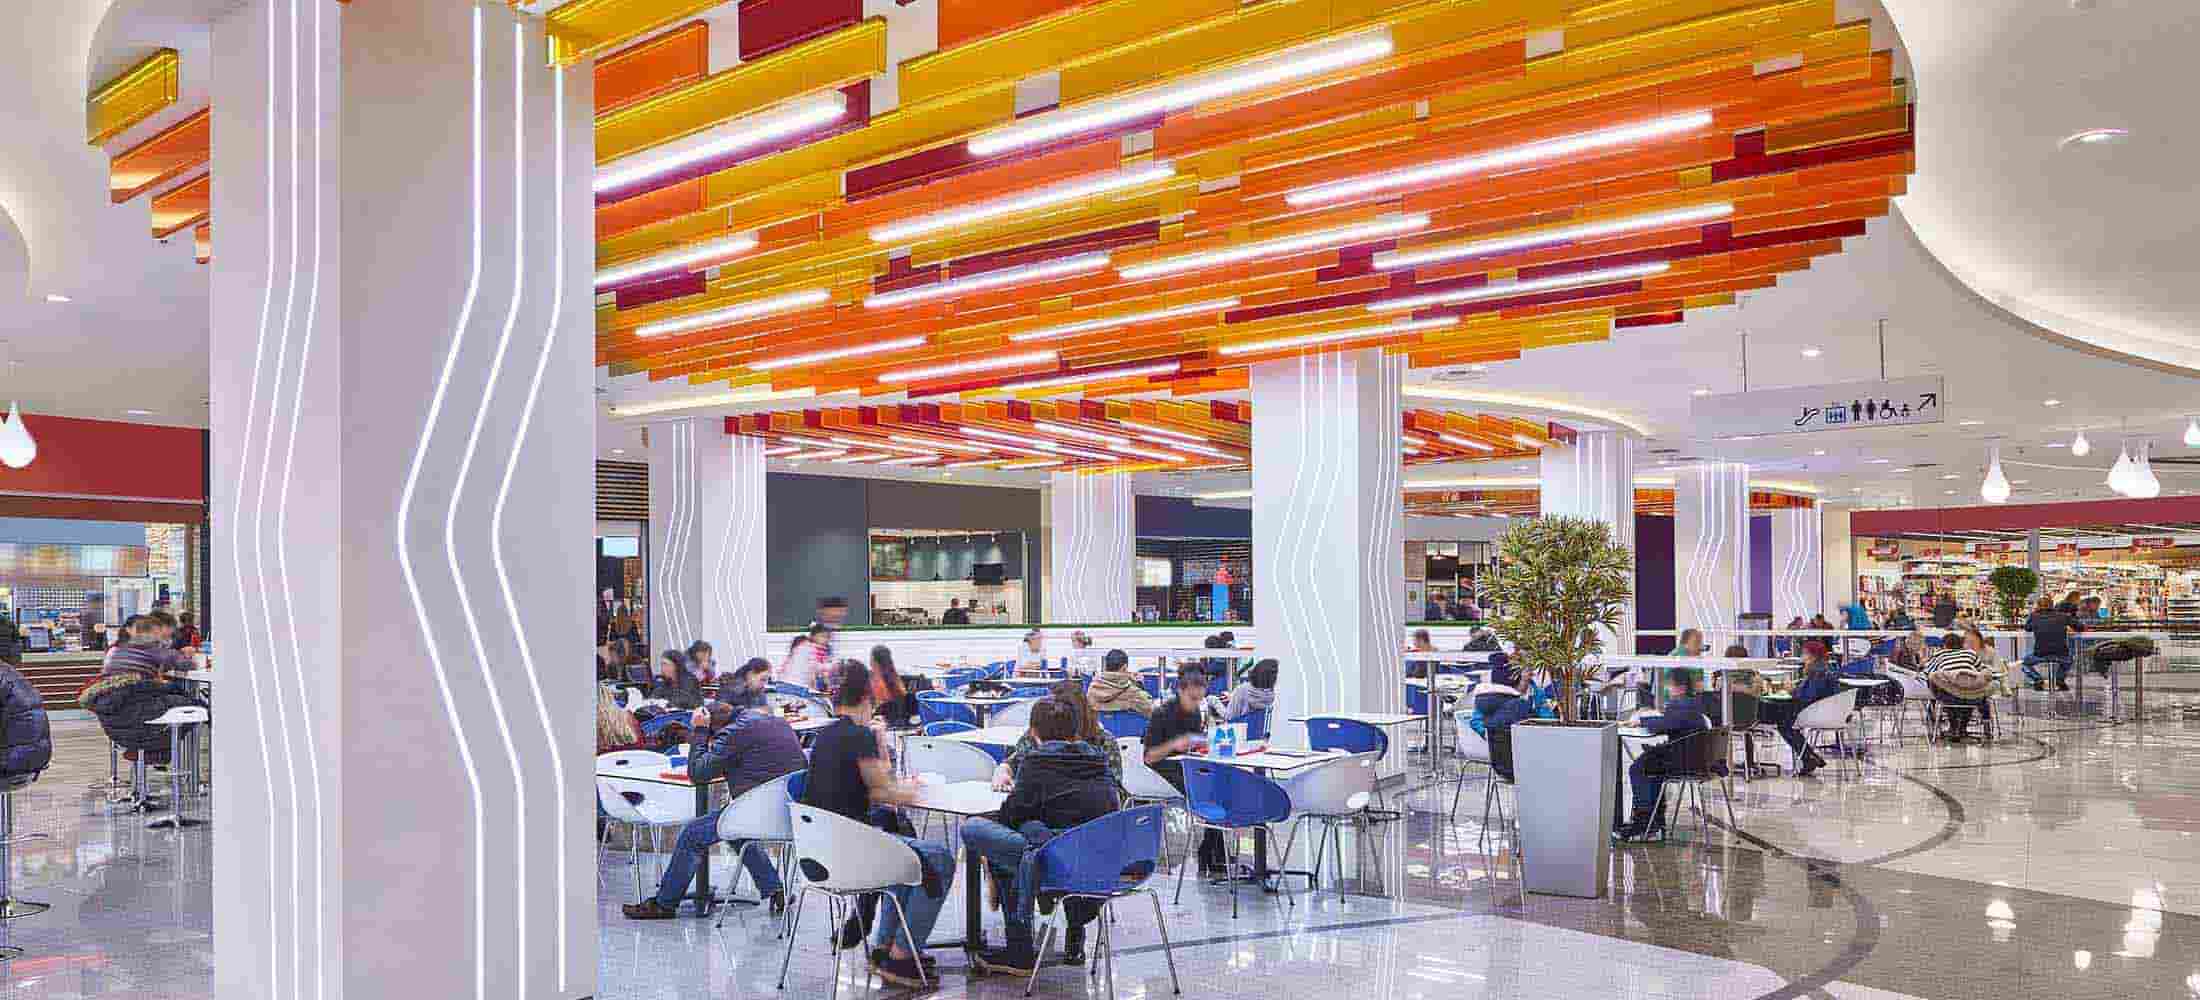 modern food court in shopping mall